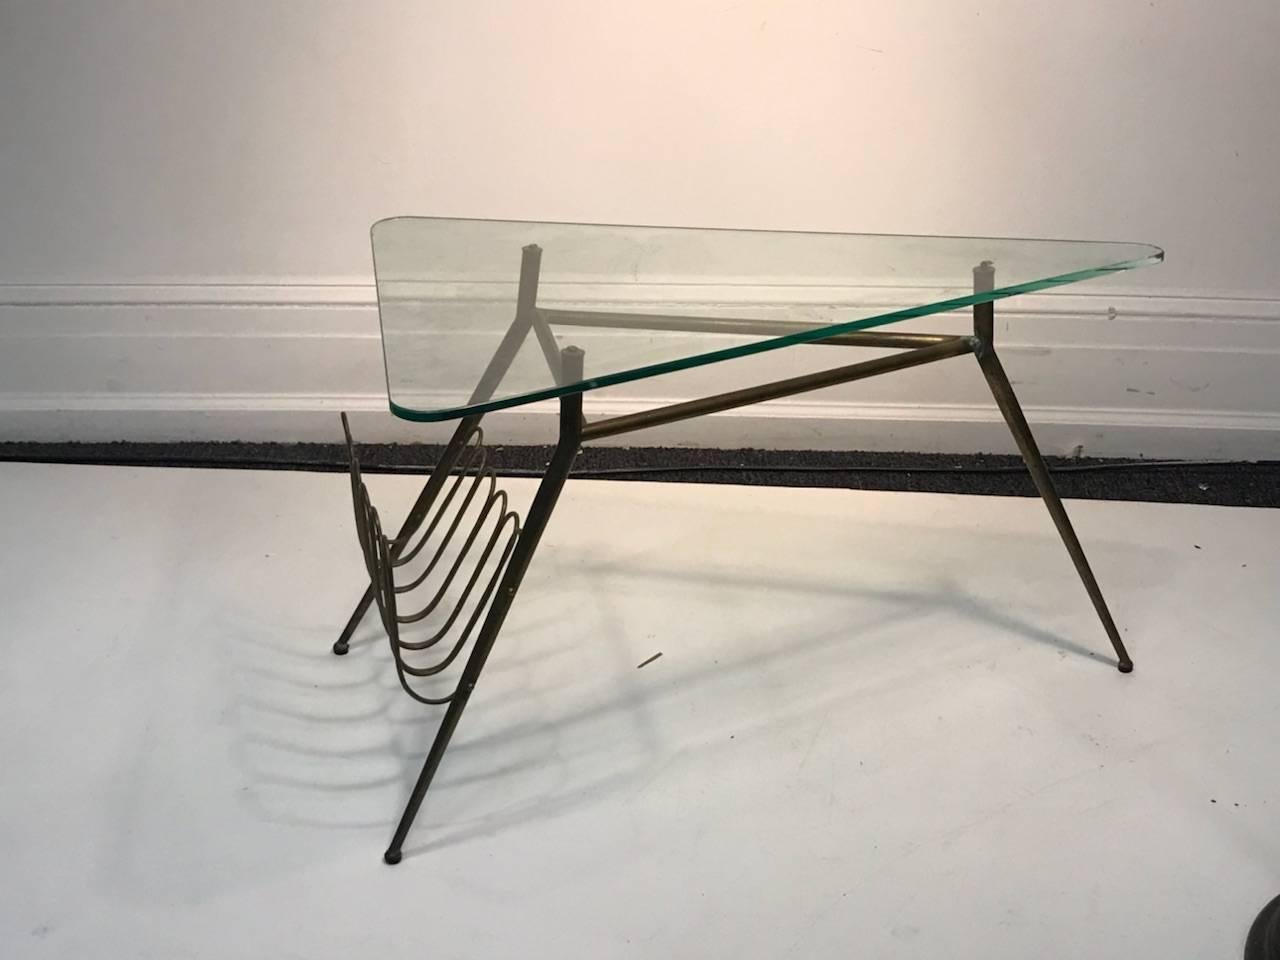 Modernist Italian brass tripod tapered leg base table with triangular glass top and angled brass magazine rack. Designed in The 1950s in Italy.